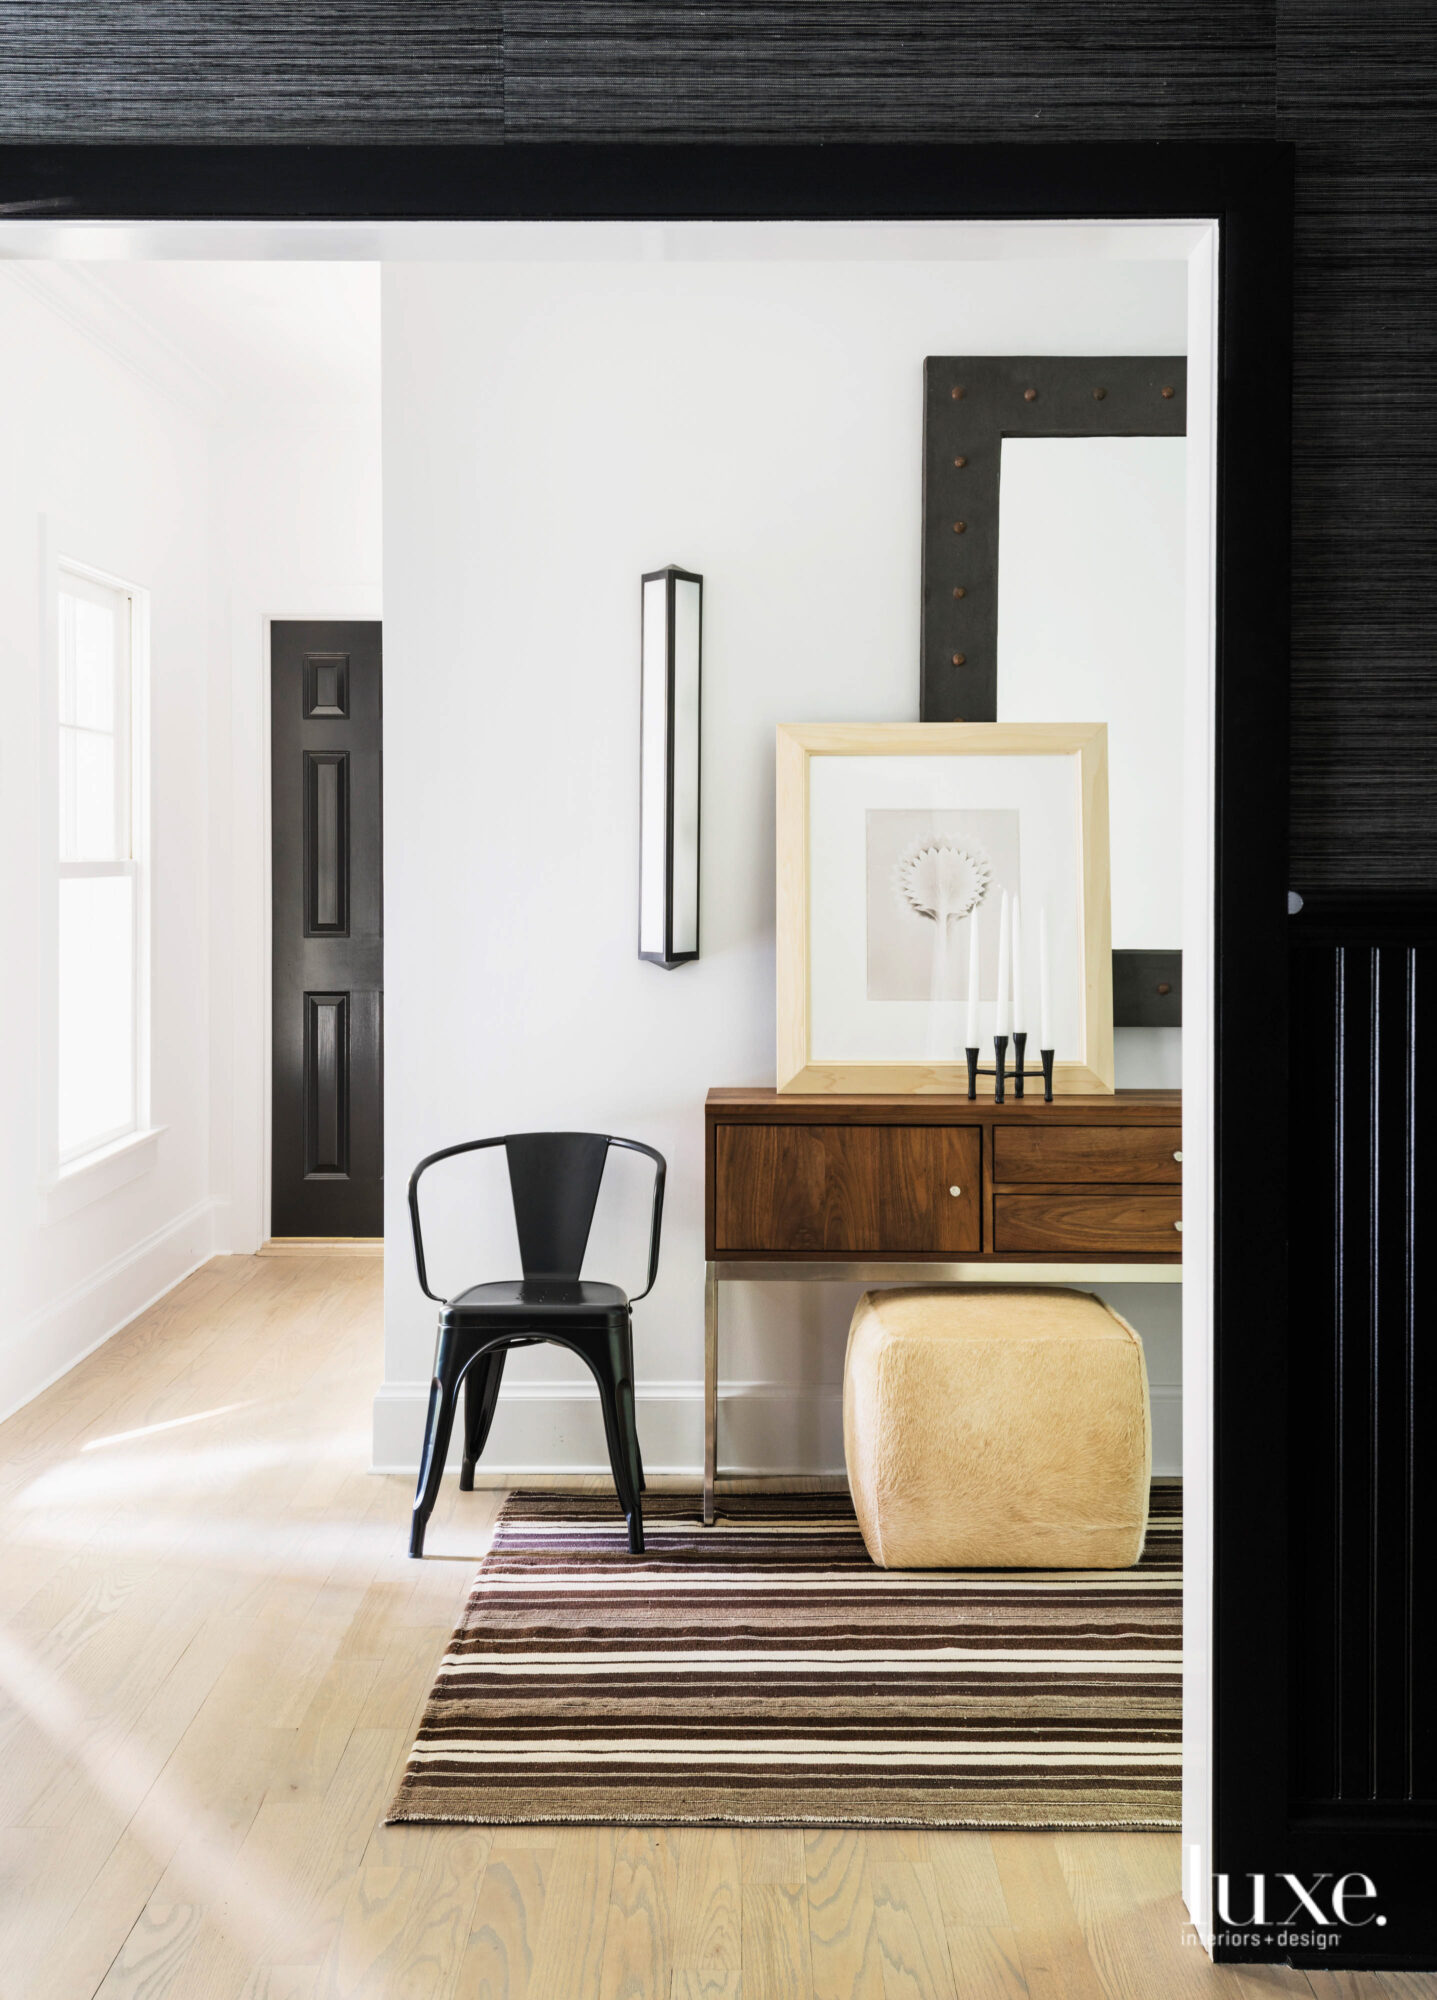 Black chair sits next to wooden table in the entryway